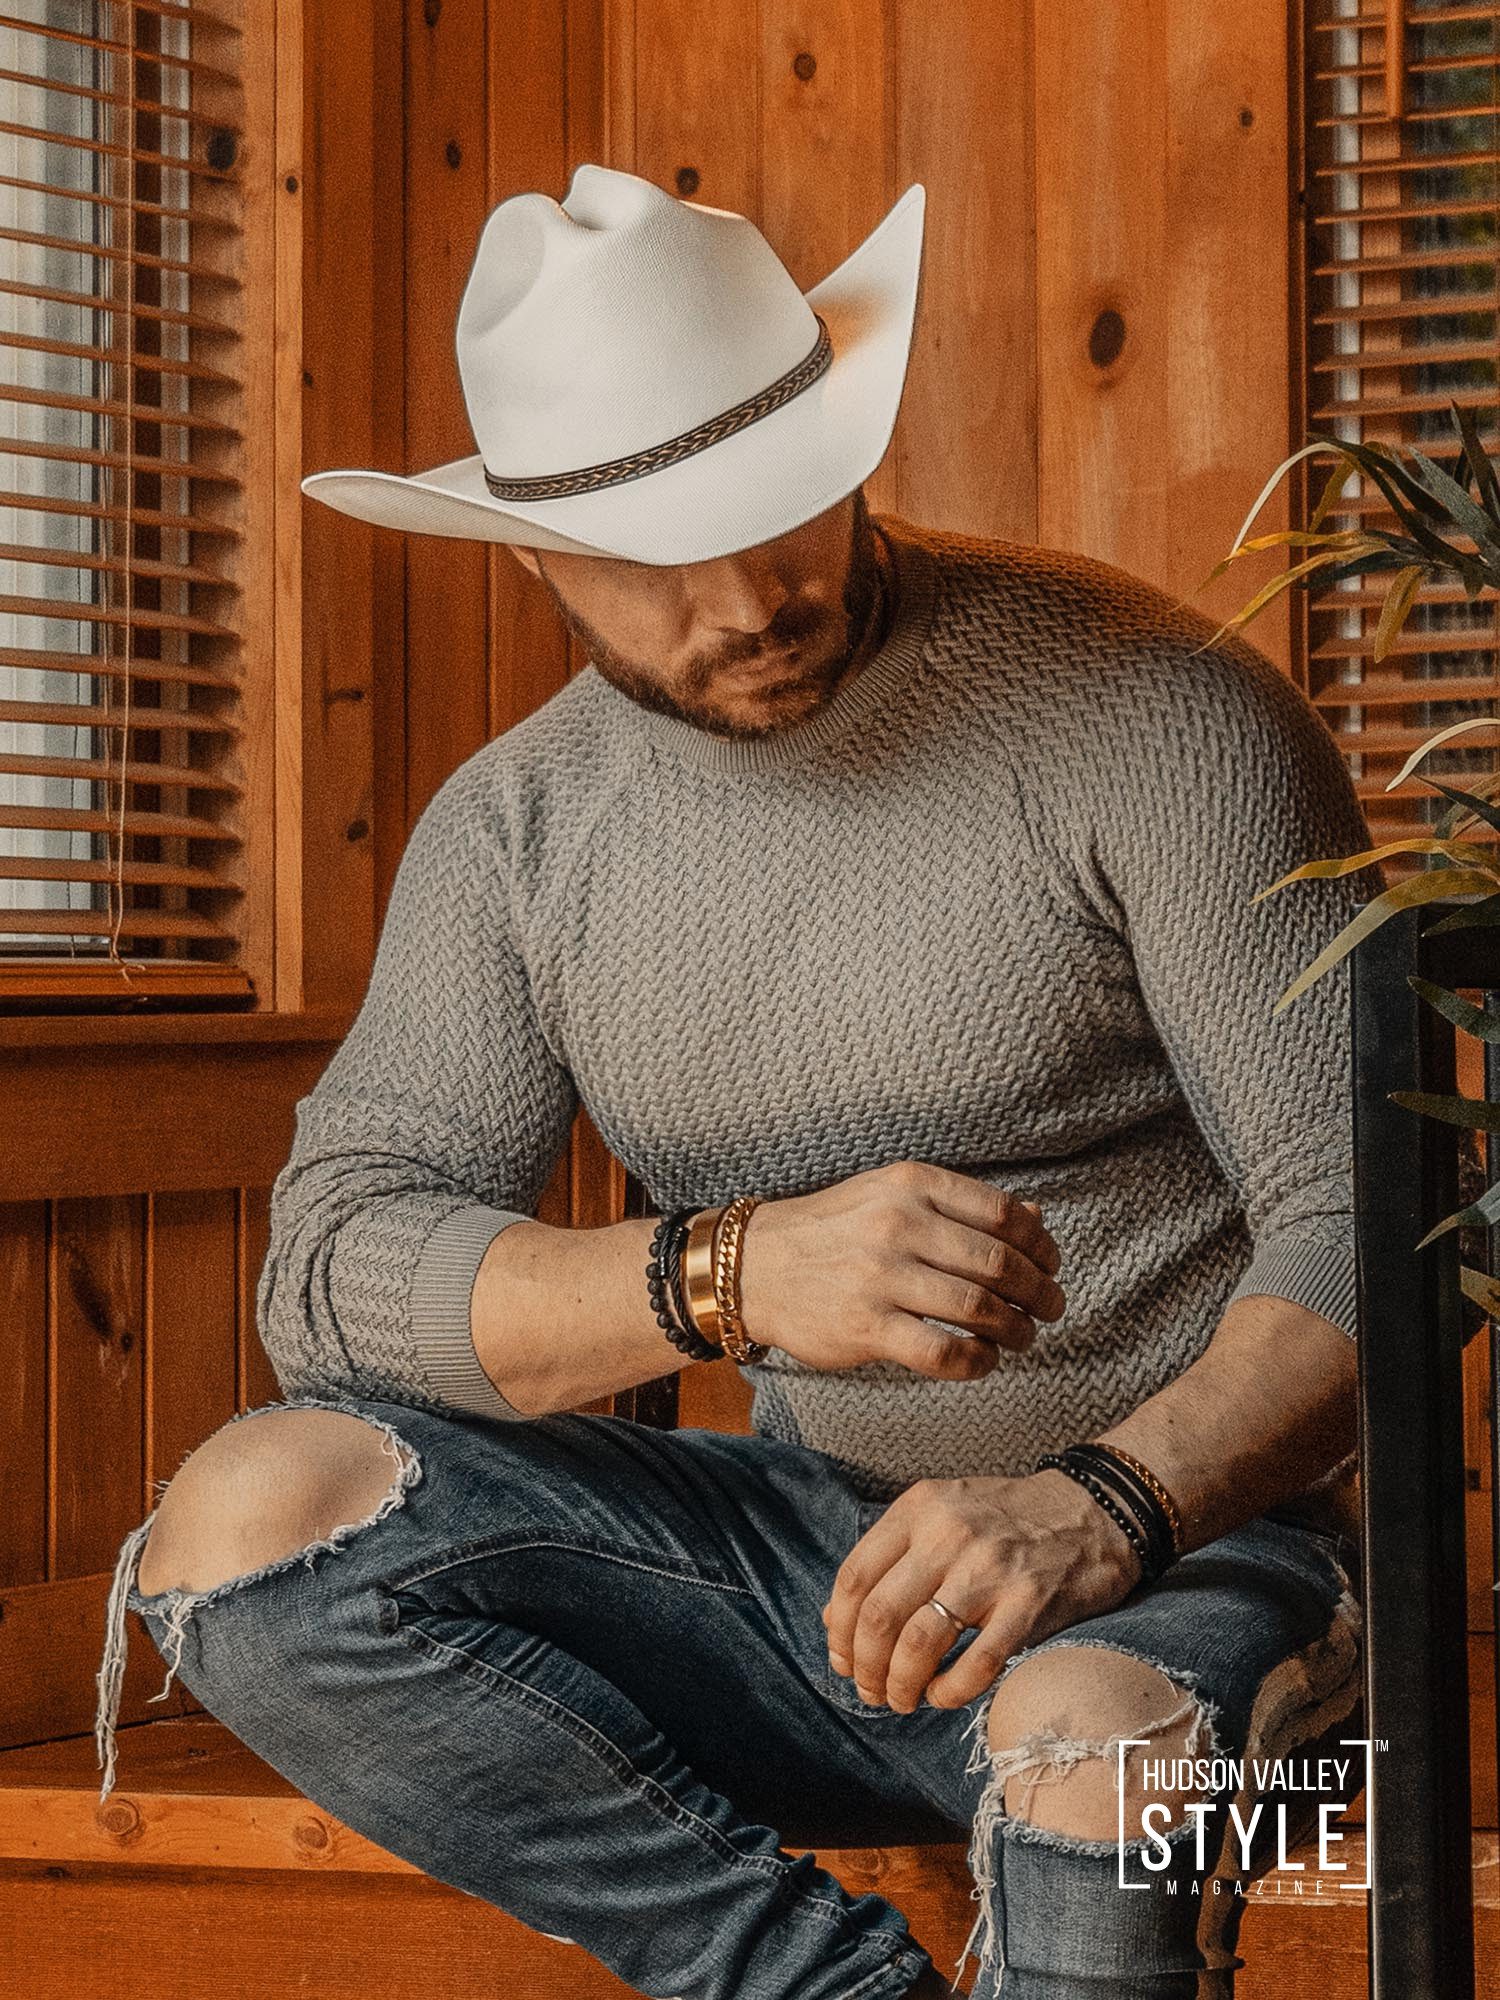 Cowboy Hat – The Top 10 Men's Fashion and Men's Style Trends for 2023 – Presented by HARD NEW YORK – Fashion Accessories for Men